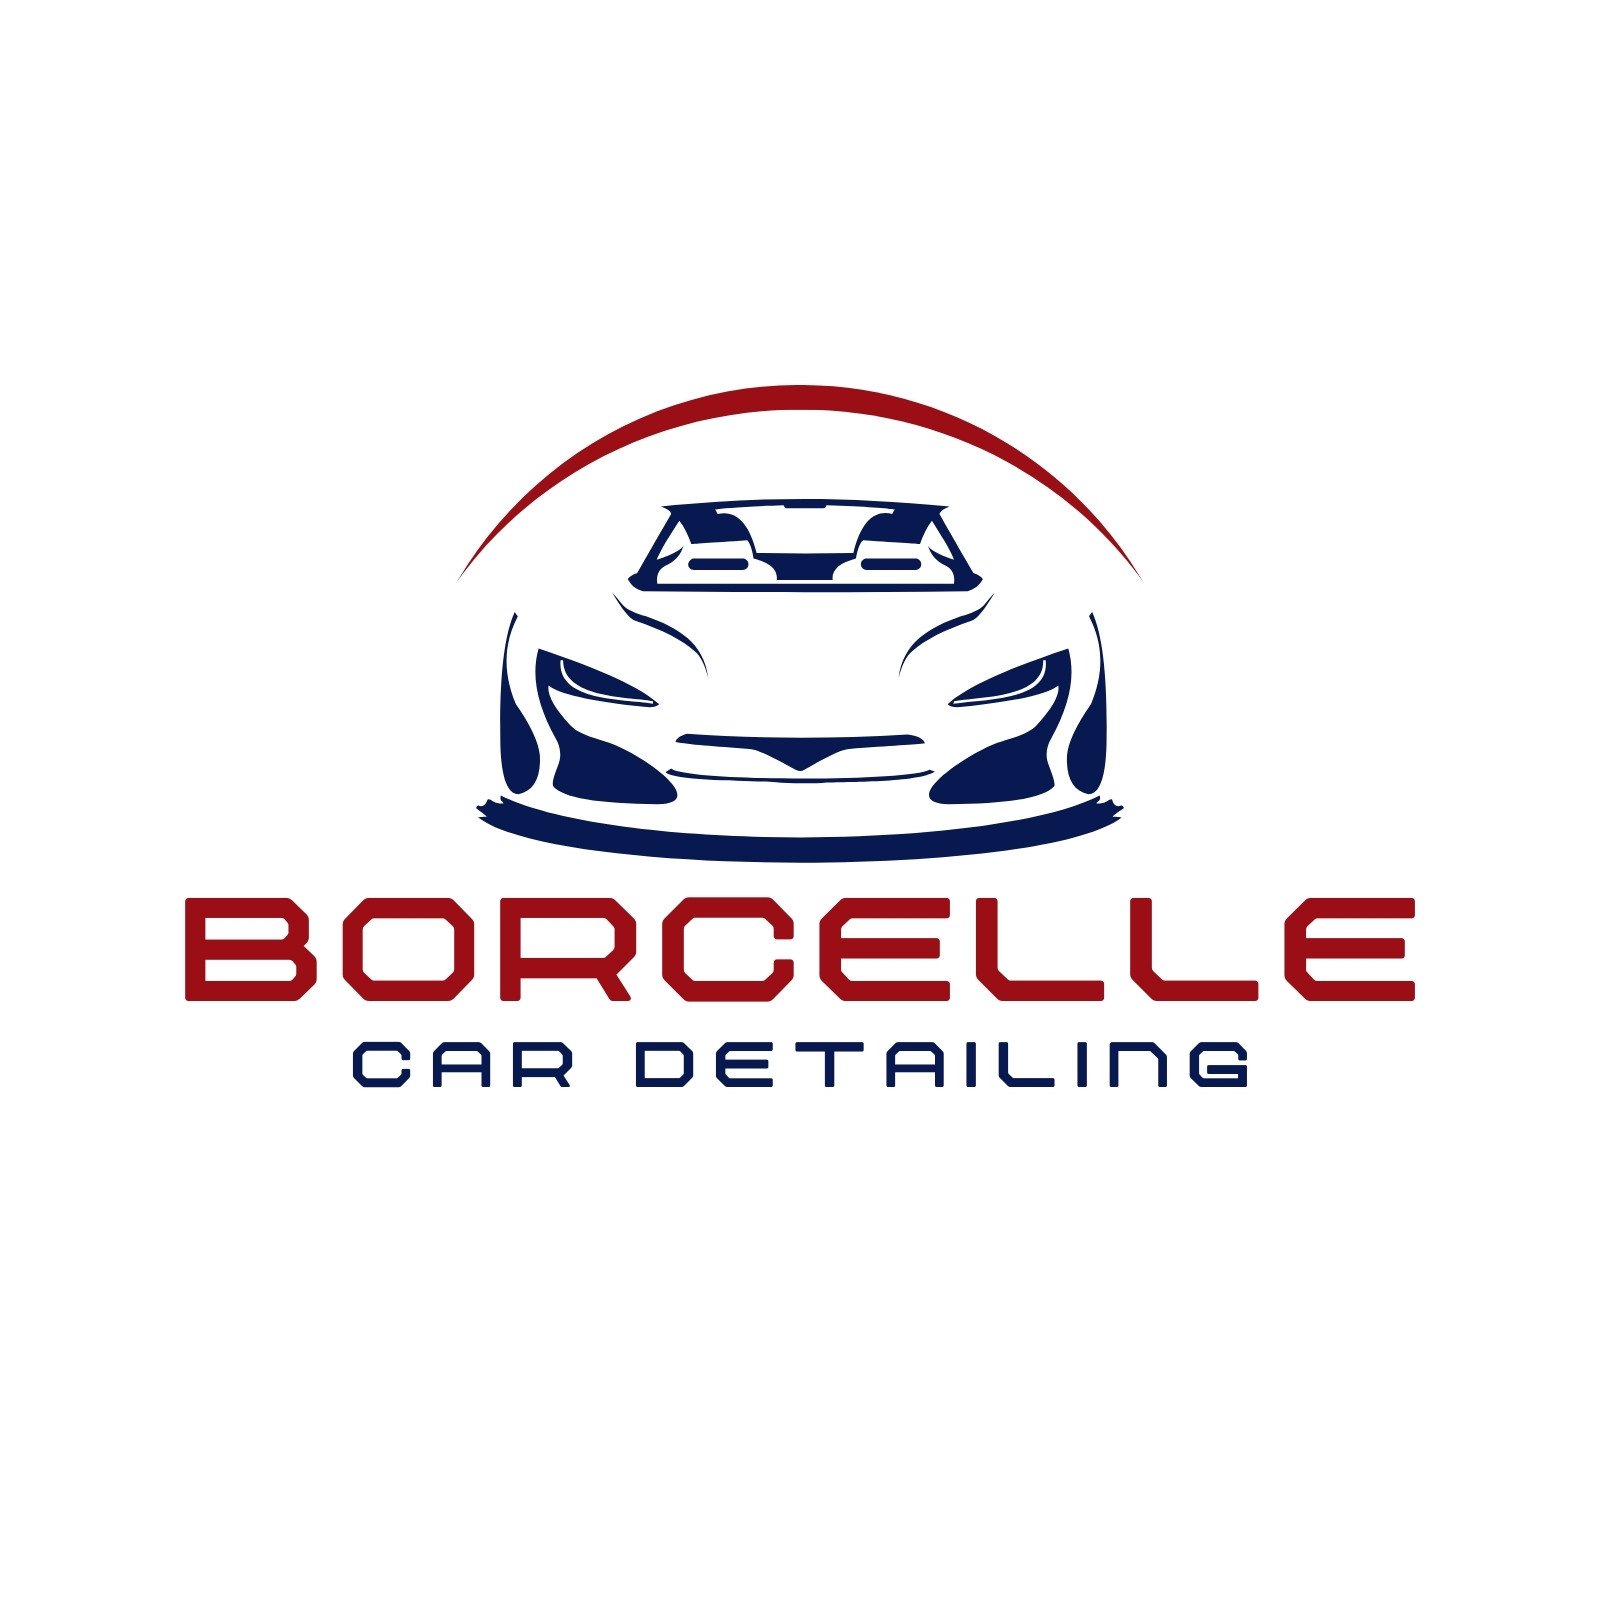 Blue and Red Minimalist Car Detailing Logo